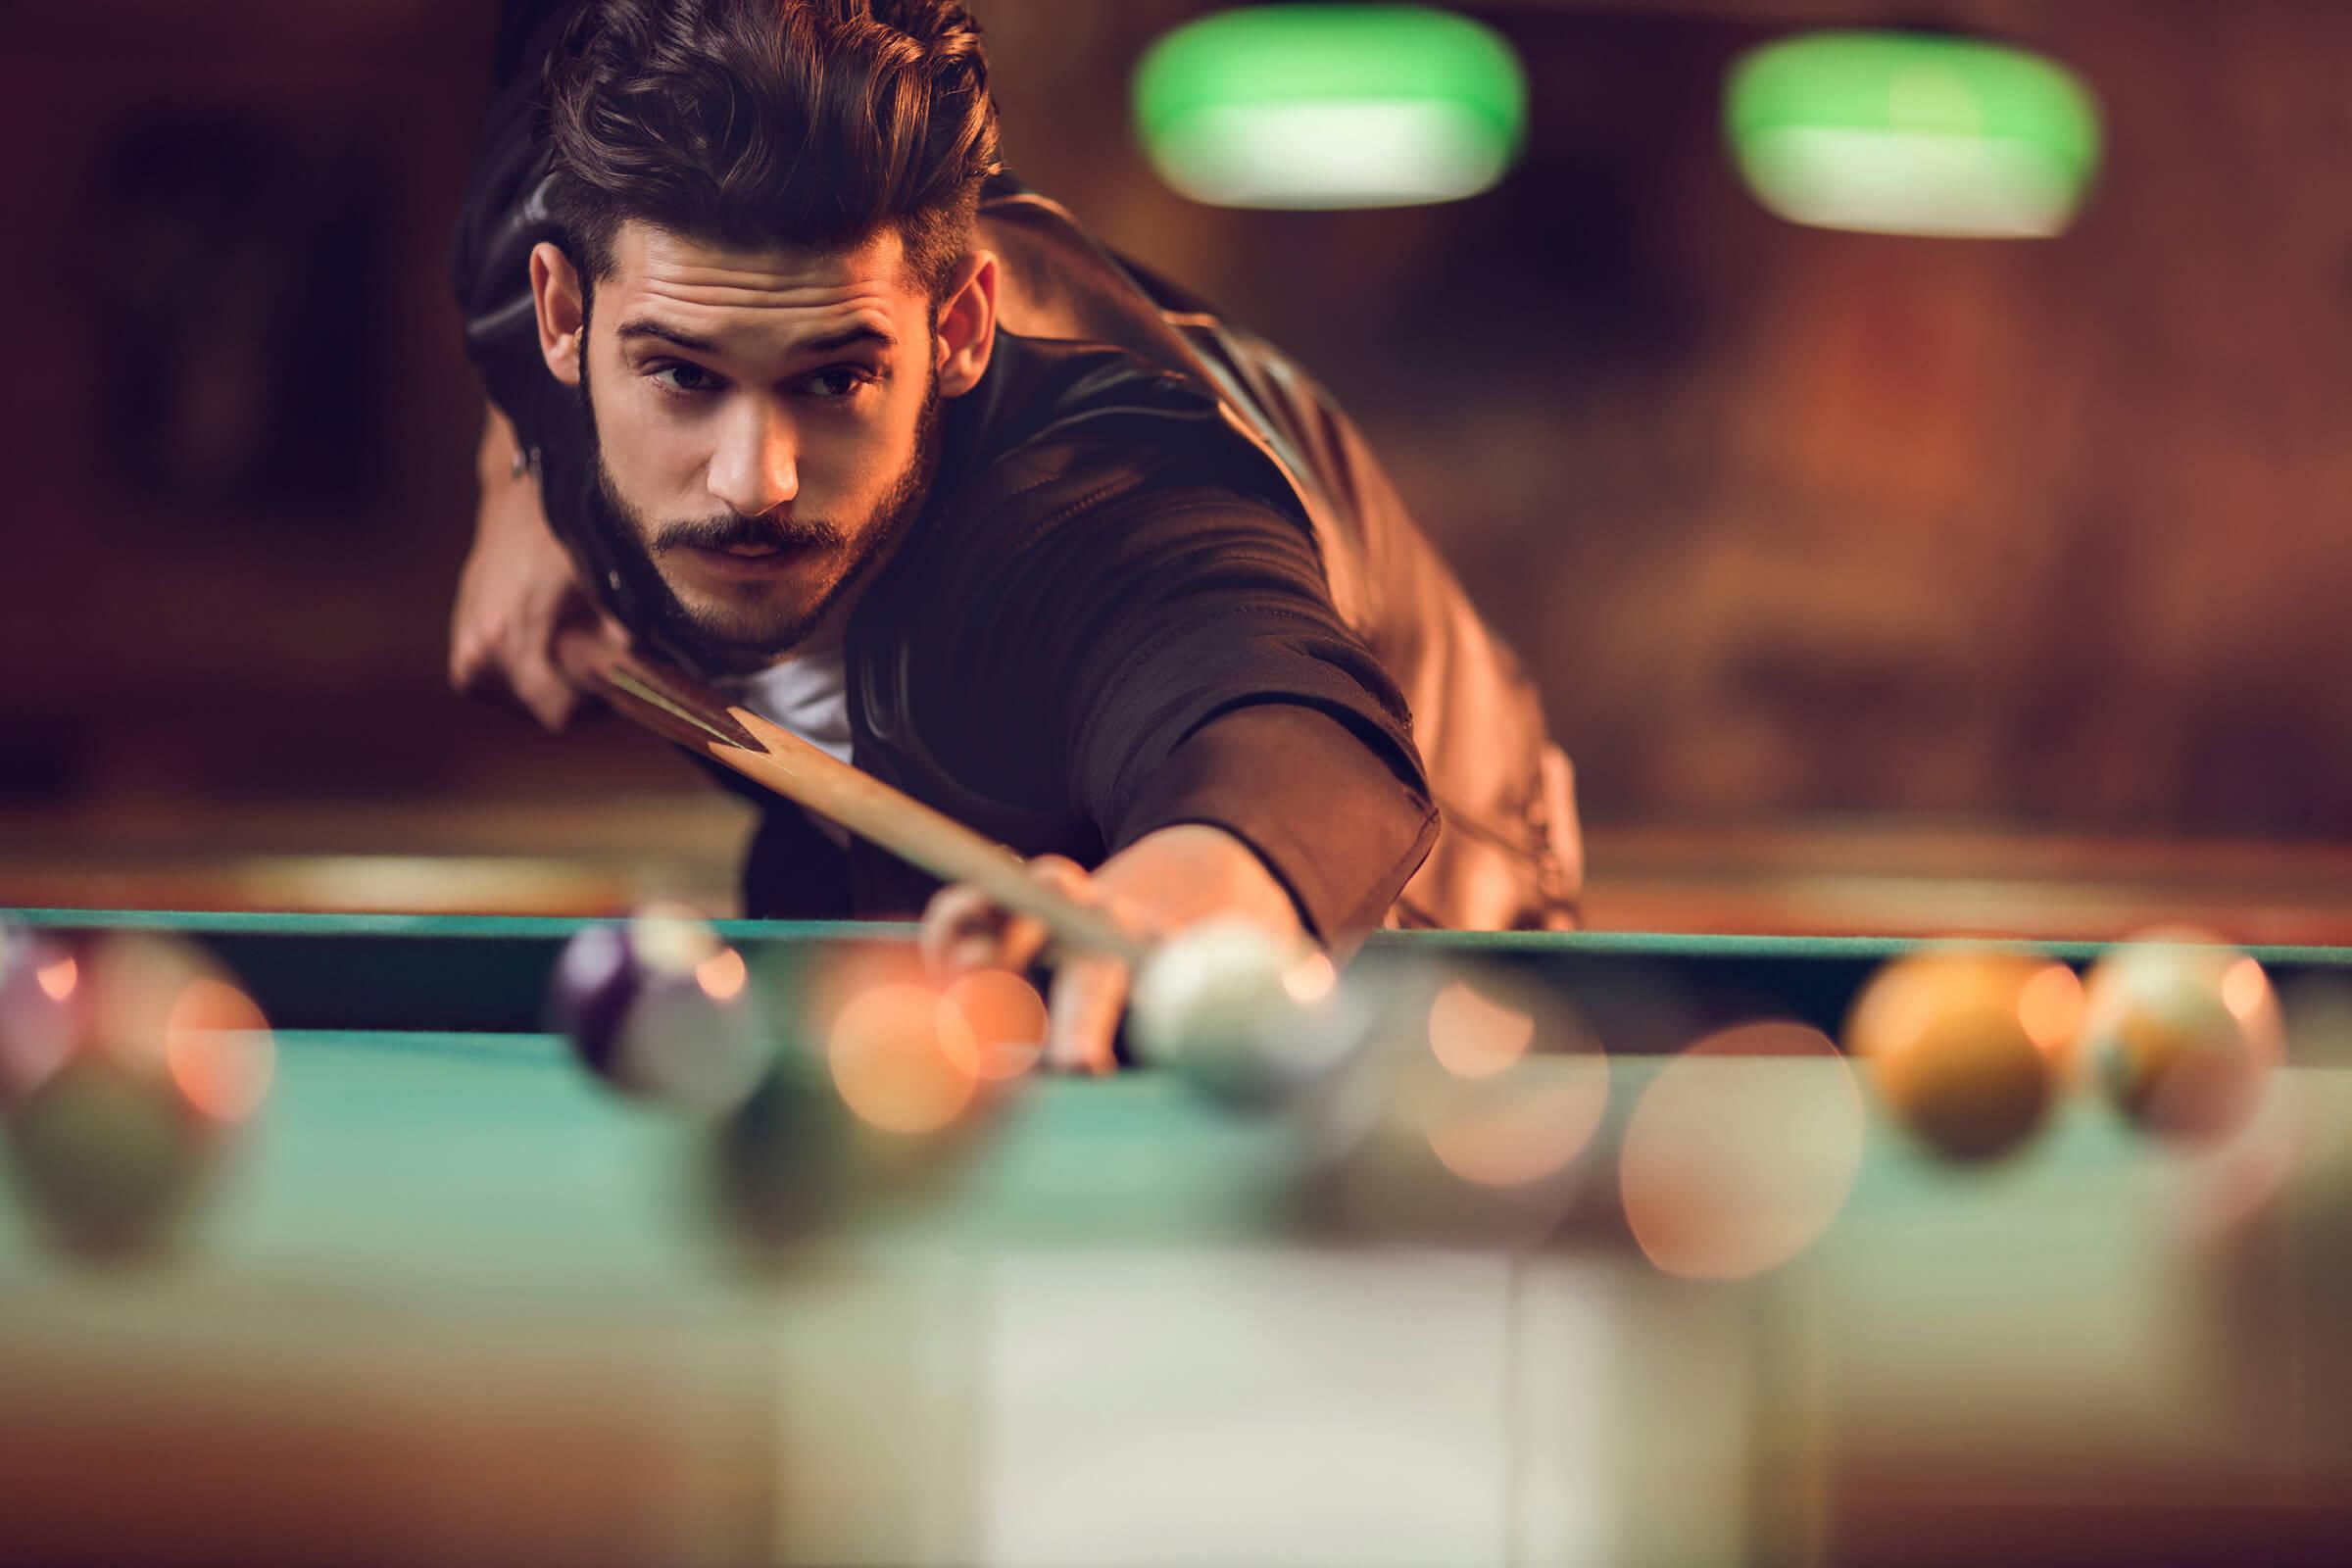 Copy of Copy of Young man playing billiard in a pool hall iStock_78986005_LARGE.jpg